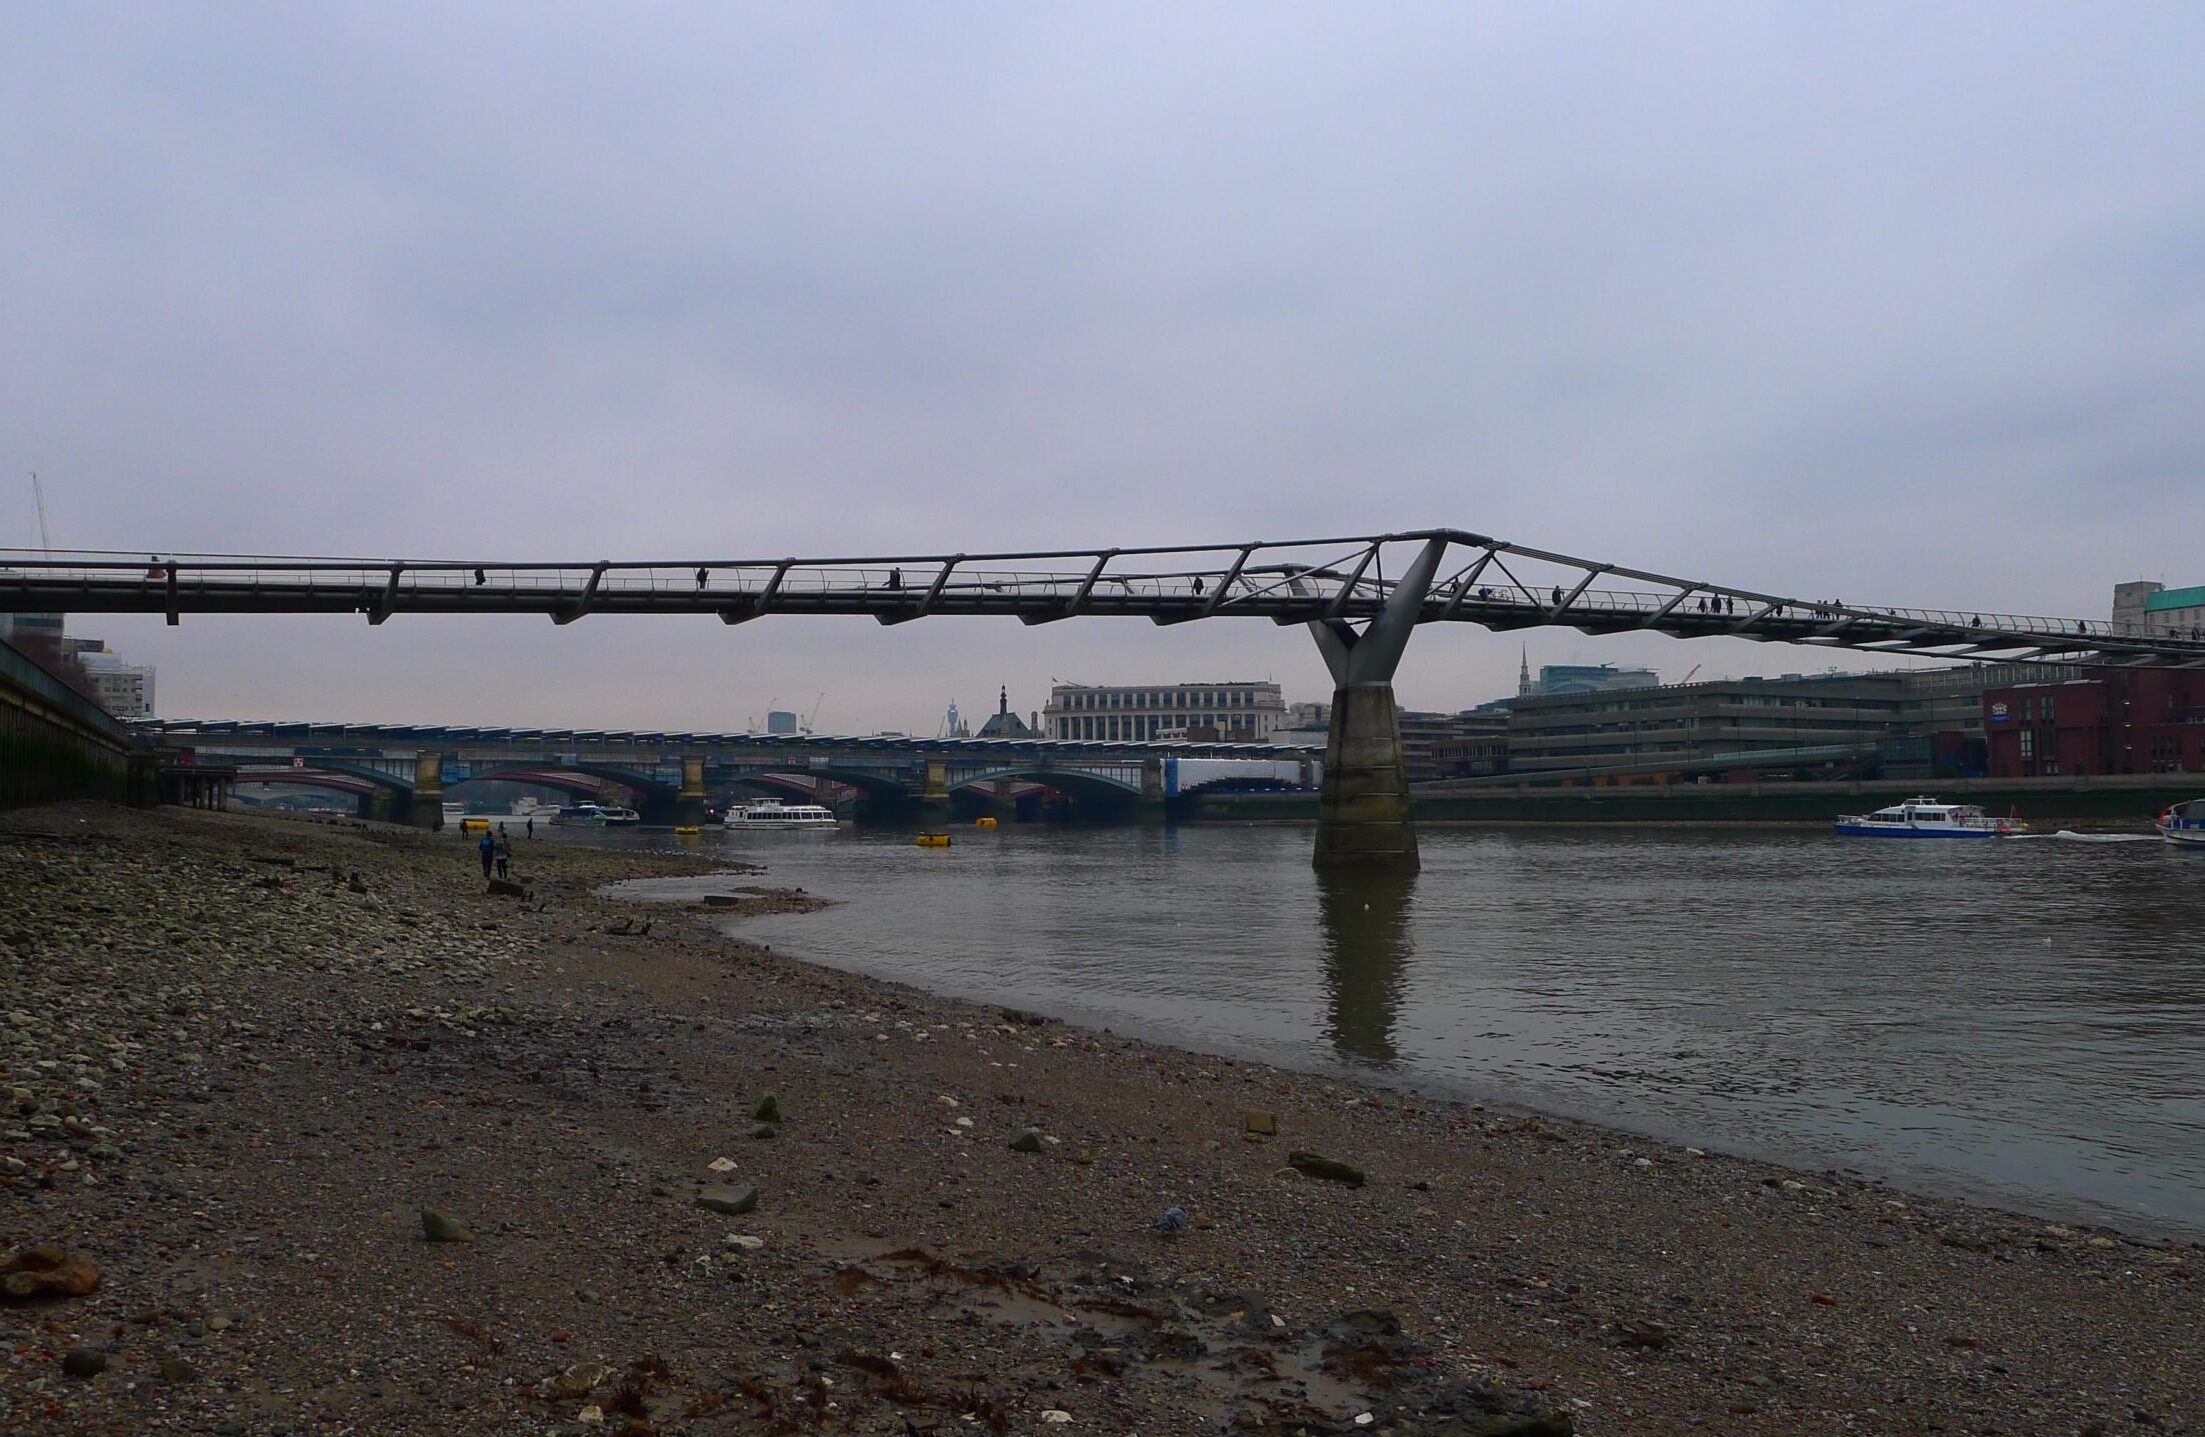 The river thames with bridge stretching over